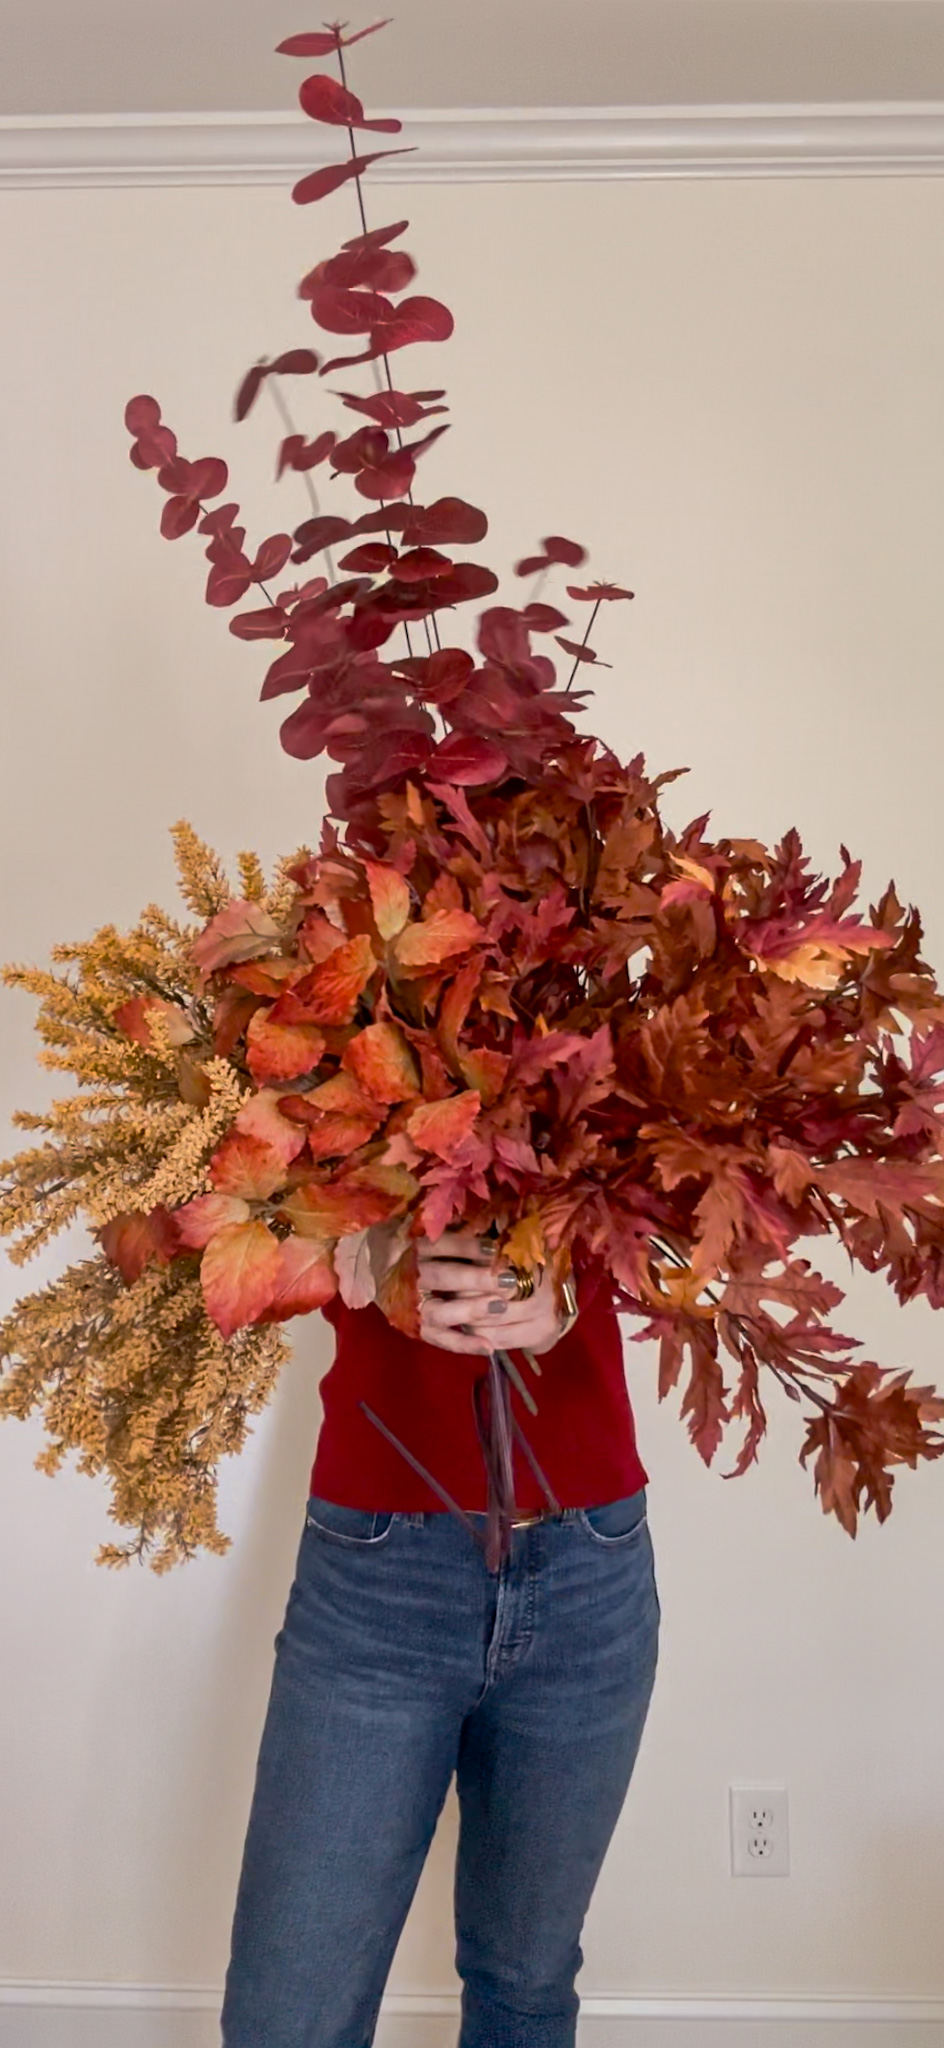 click to learn how to arrange faux fall stems